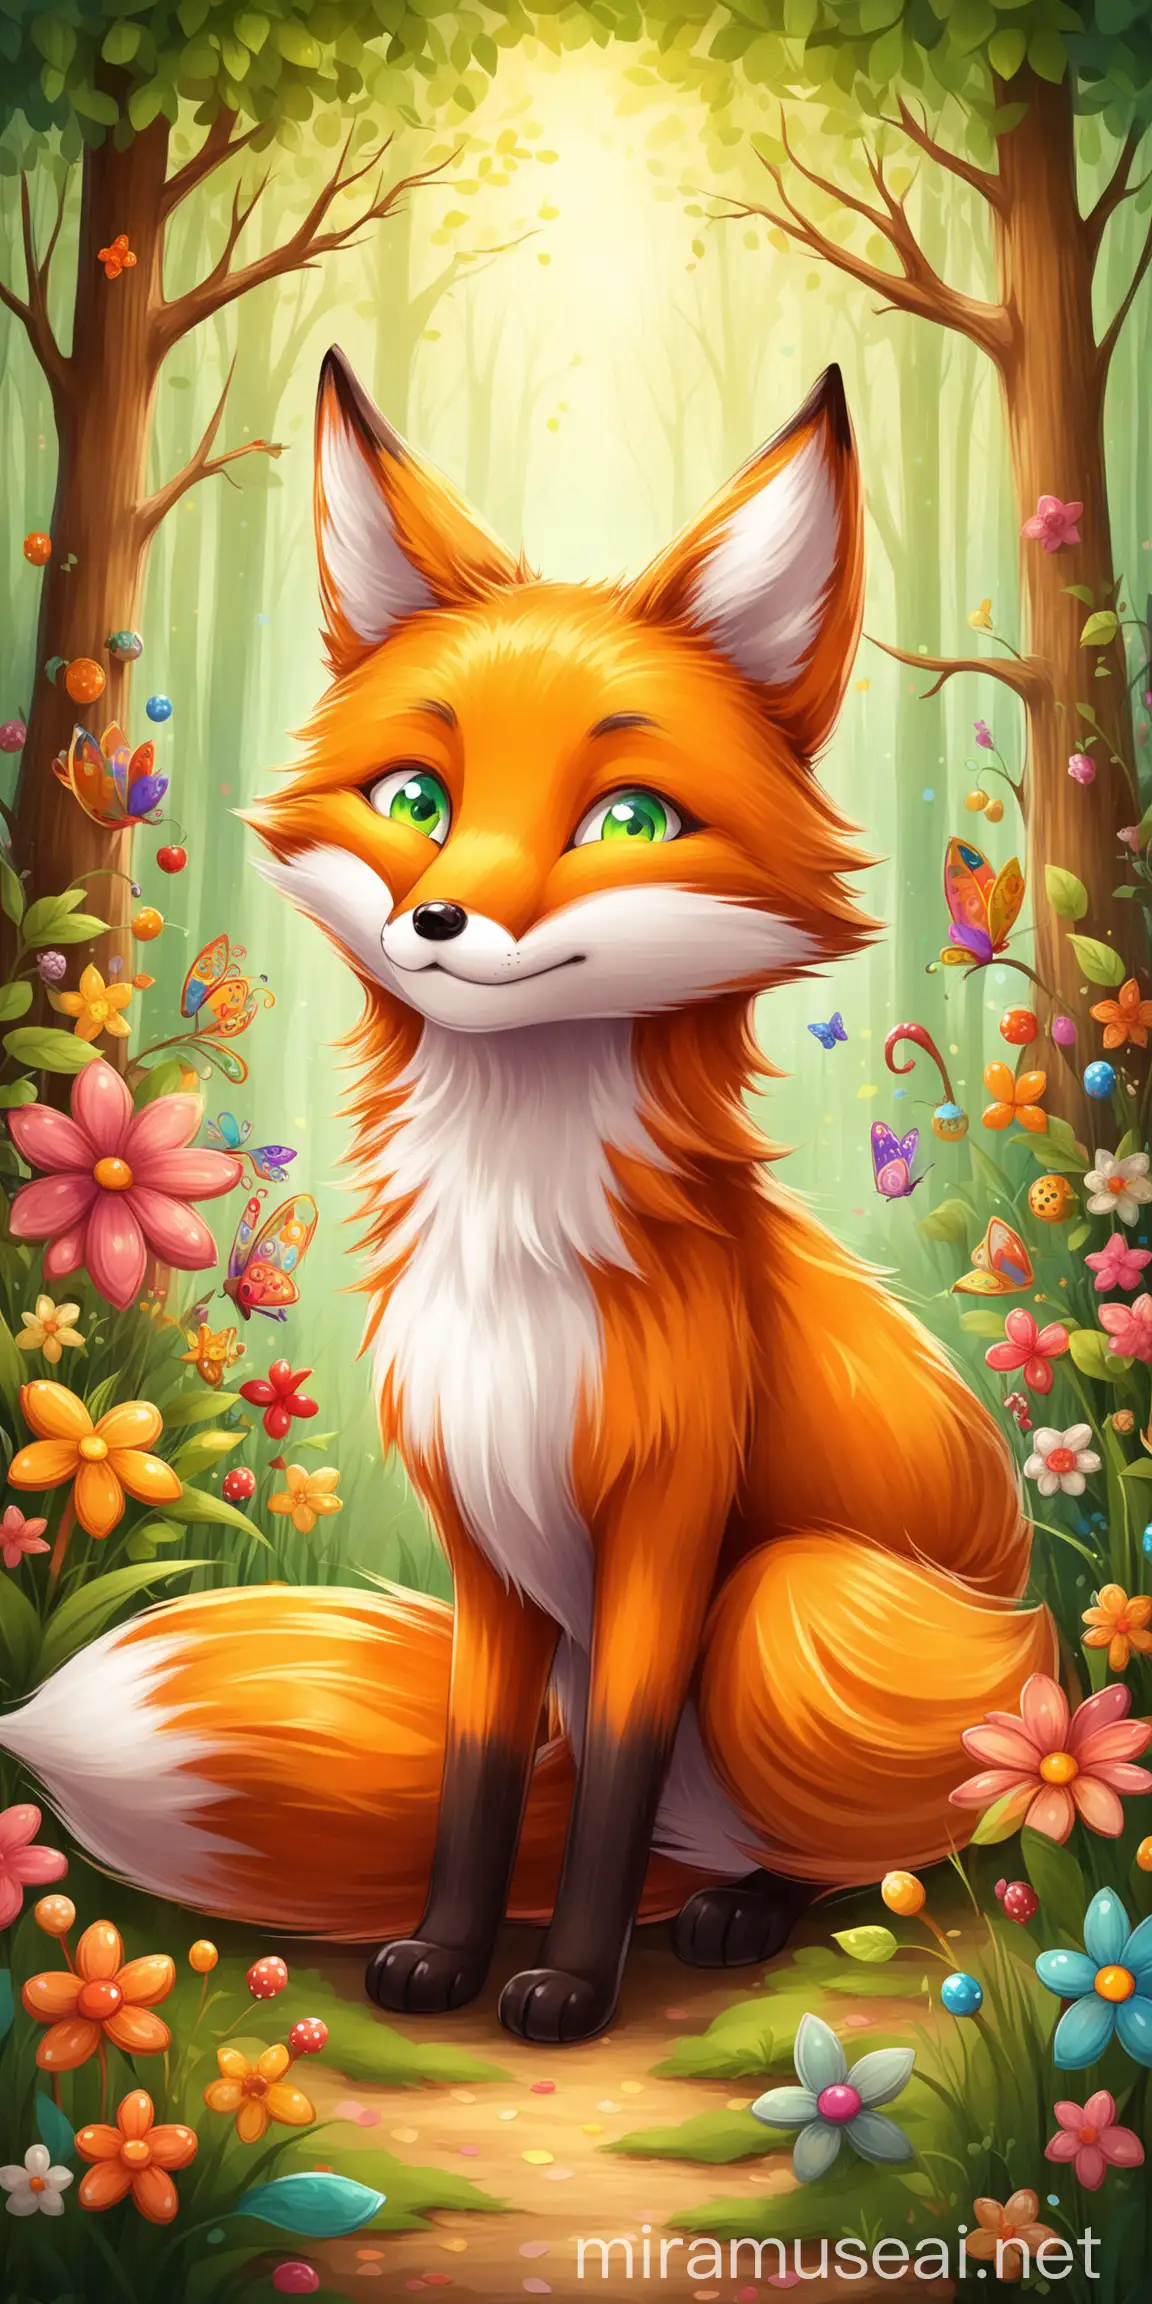 Friendly Fox in Whimsical Forest Playful and Vibrant Childrens Illustration